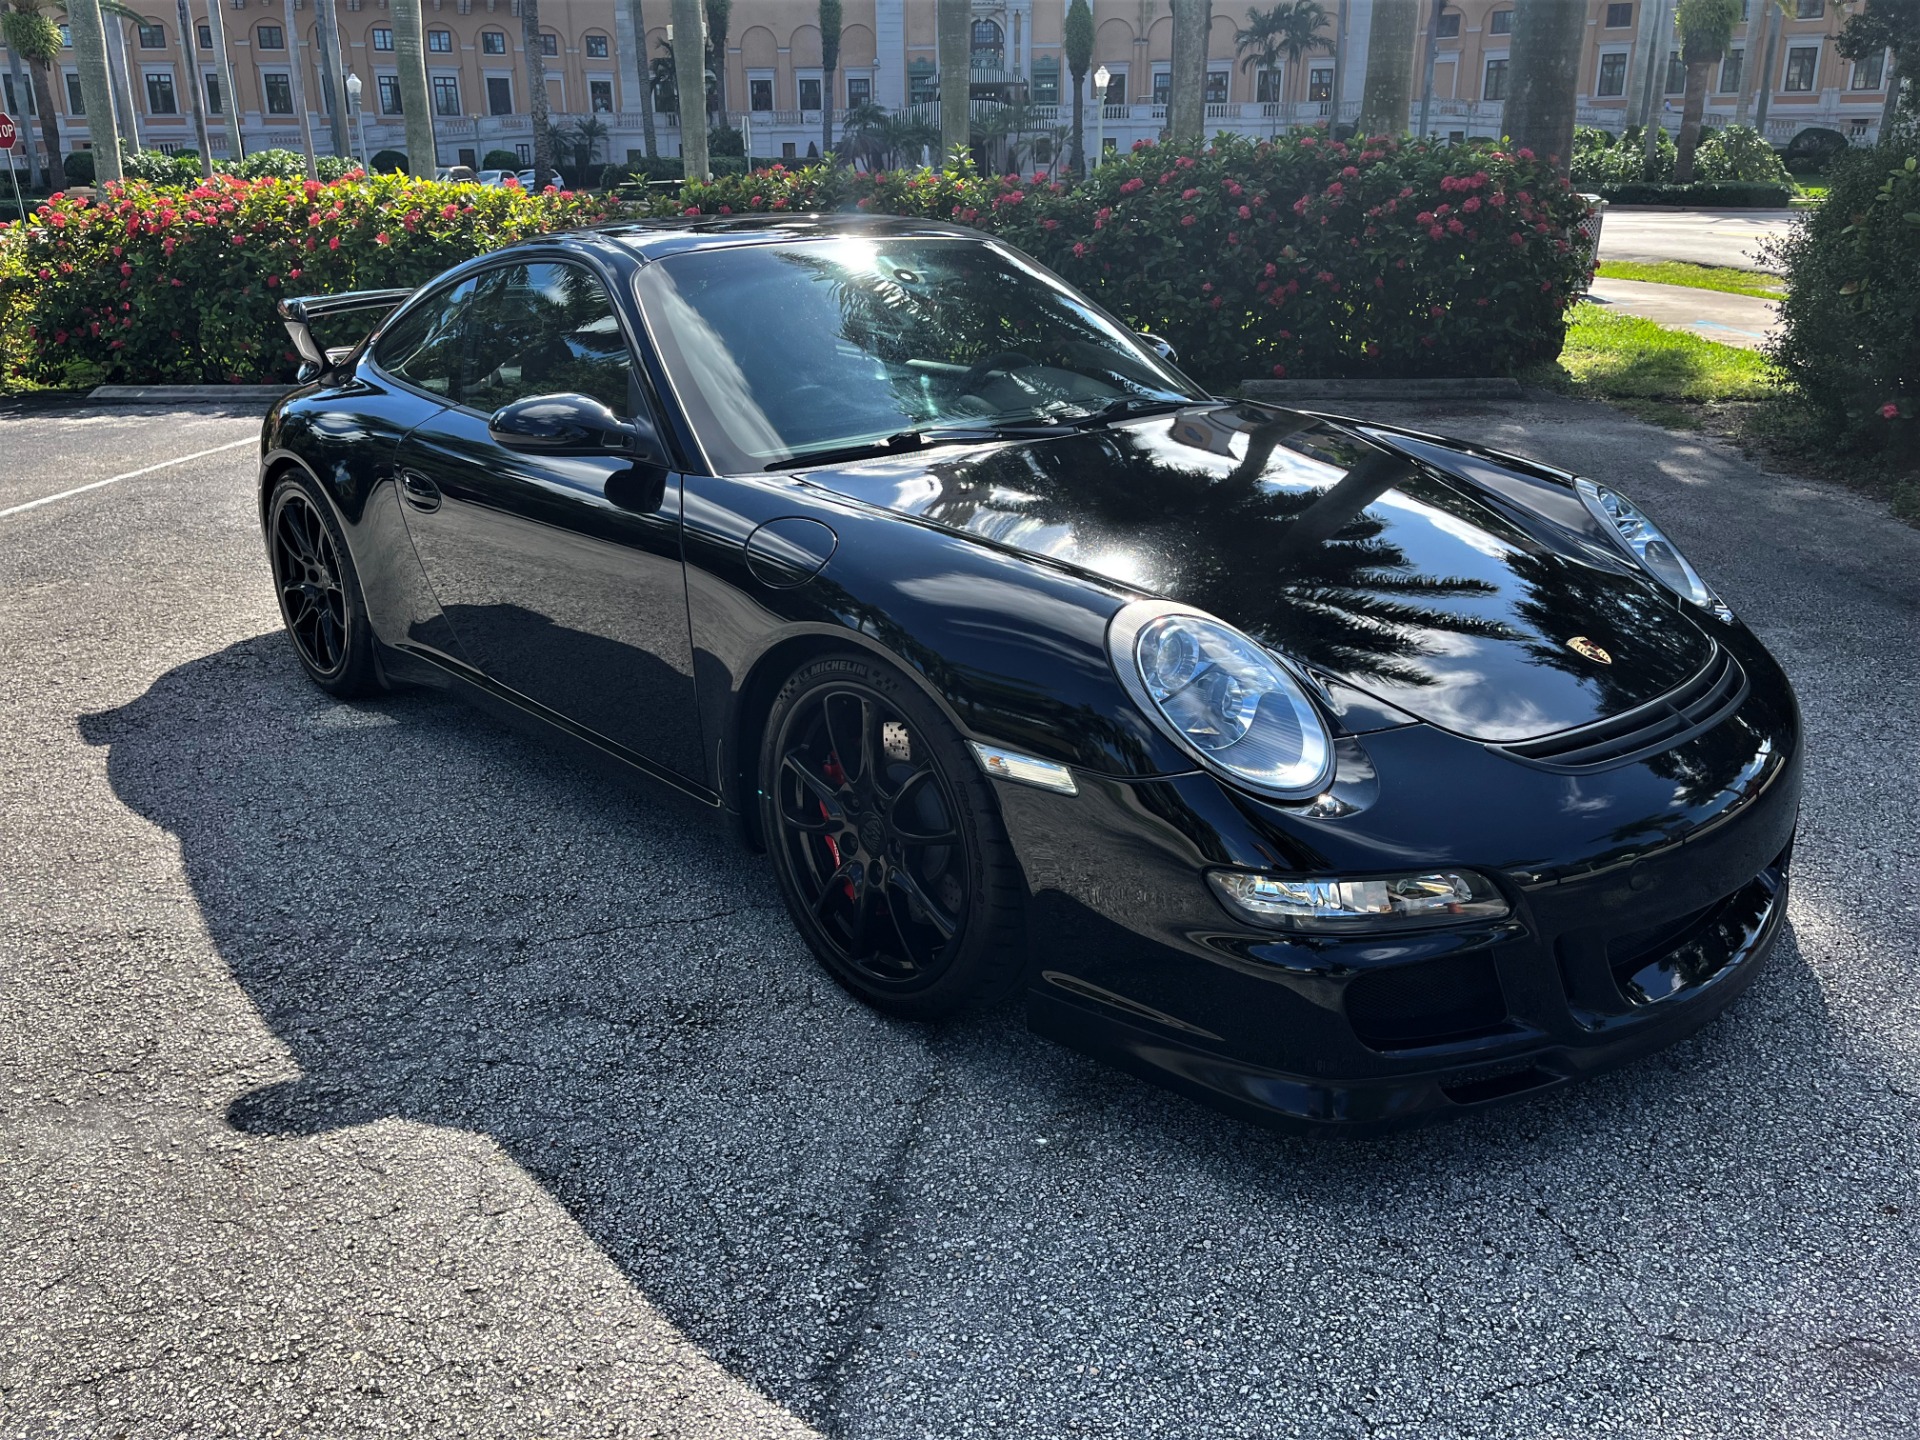 Used 2007 Porsche 911 GT3 for sale $139,850 at The Gables Sports Cars in Miami FL 33146 2